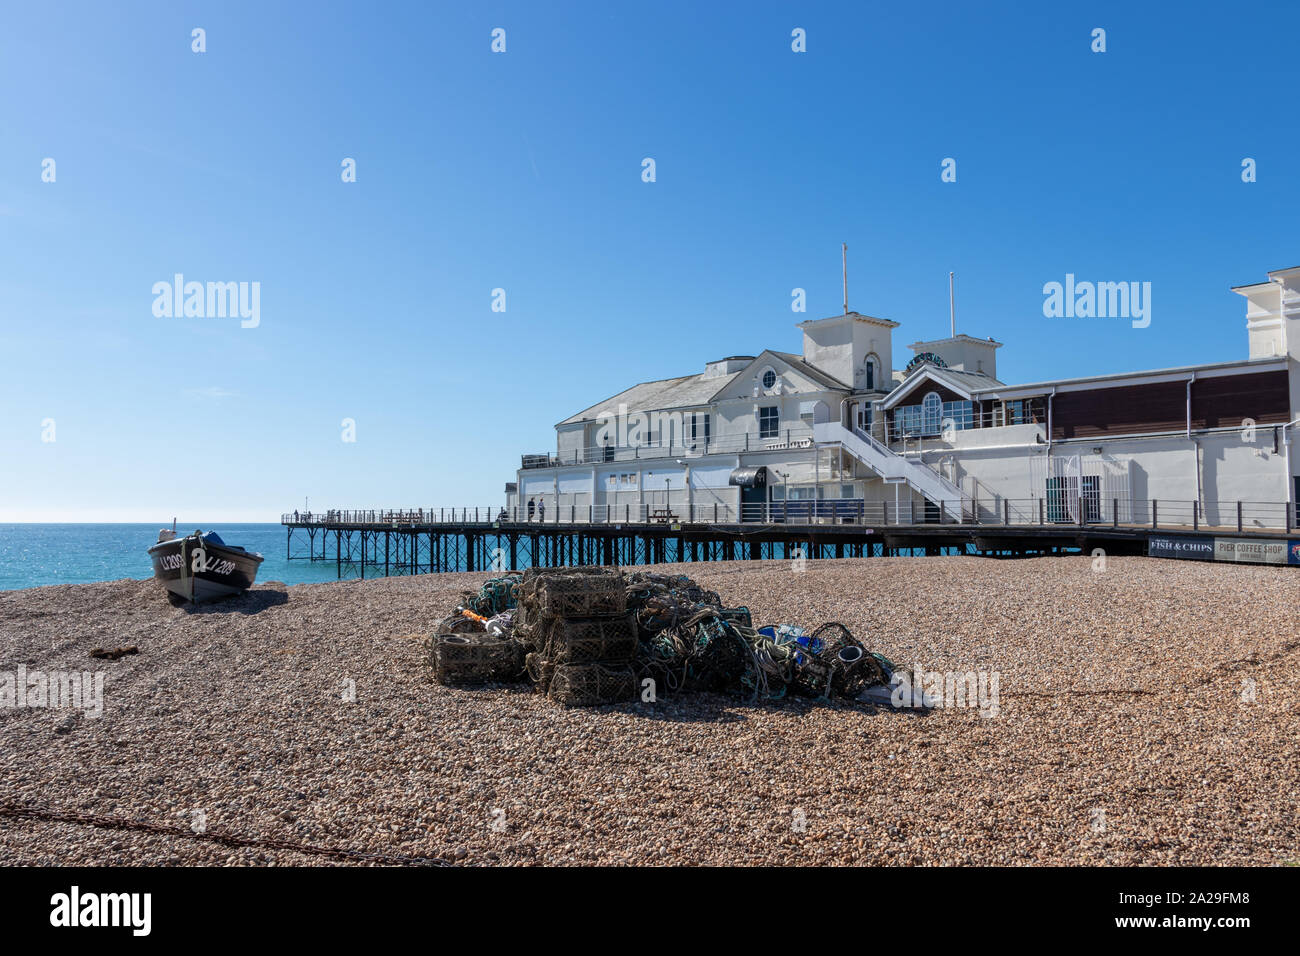 Bognor Regis pier with fishing nets and lobster pods in the foreground on the pebble beach Stock Photo